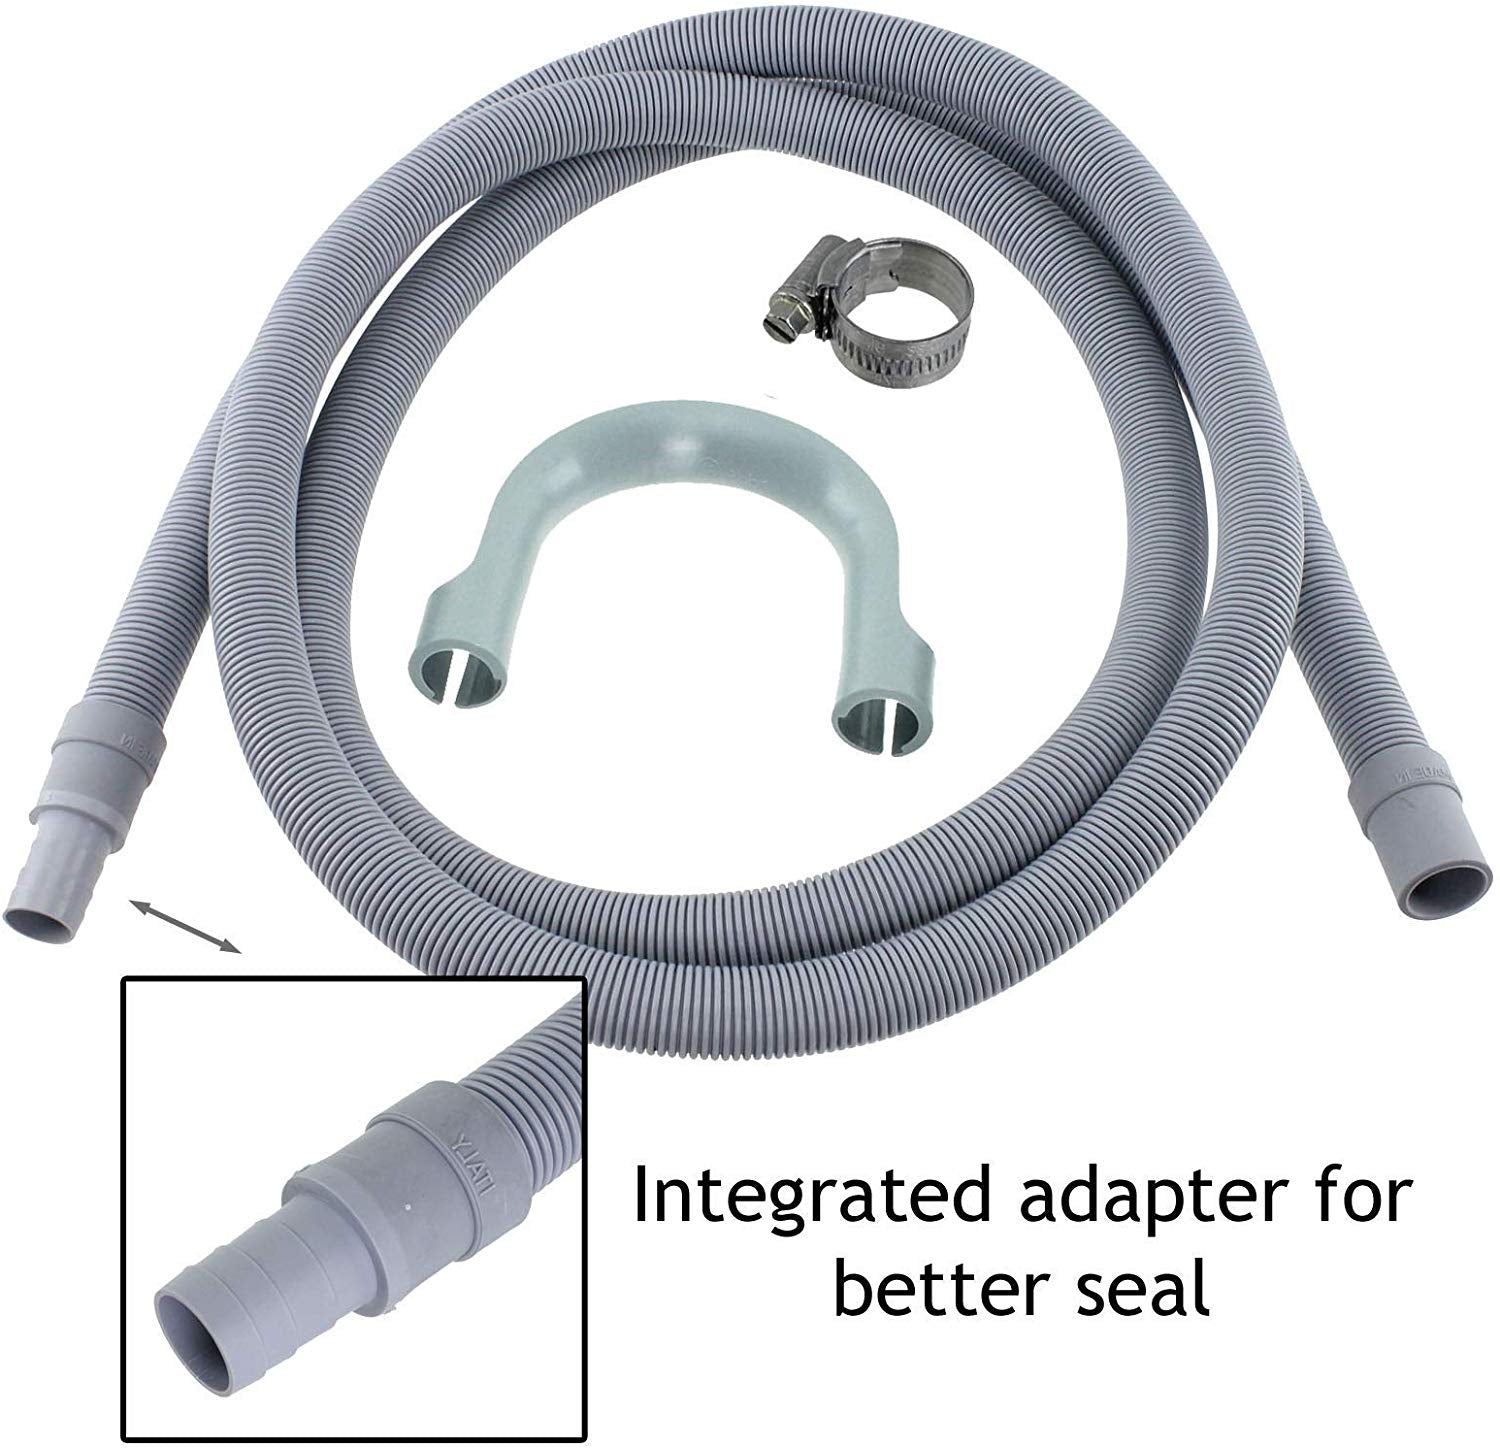 Drain Hose Extension Pipe Kit for Hoover Washing Machine Dishwasher (2.5m, 19mm / 22mm)